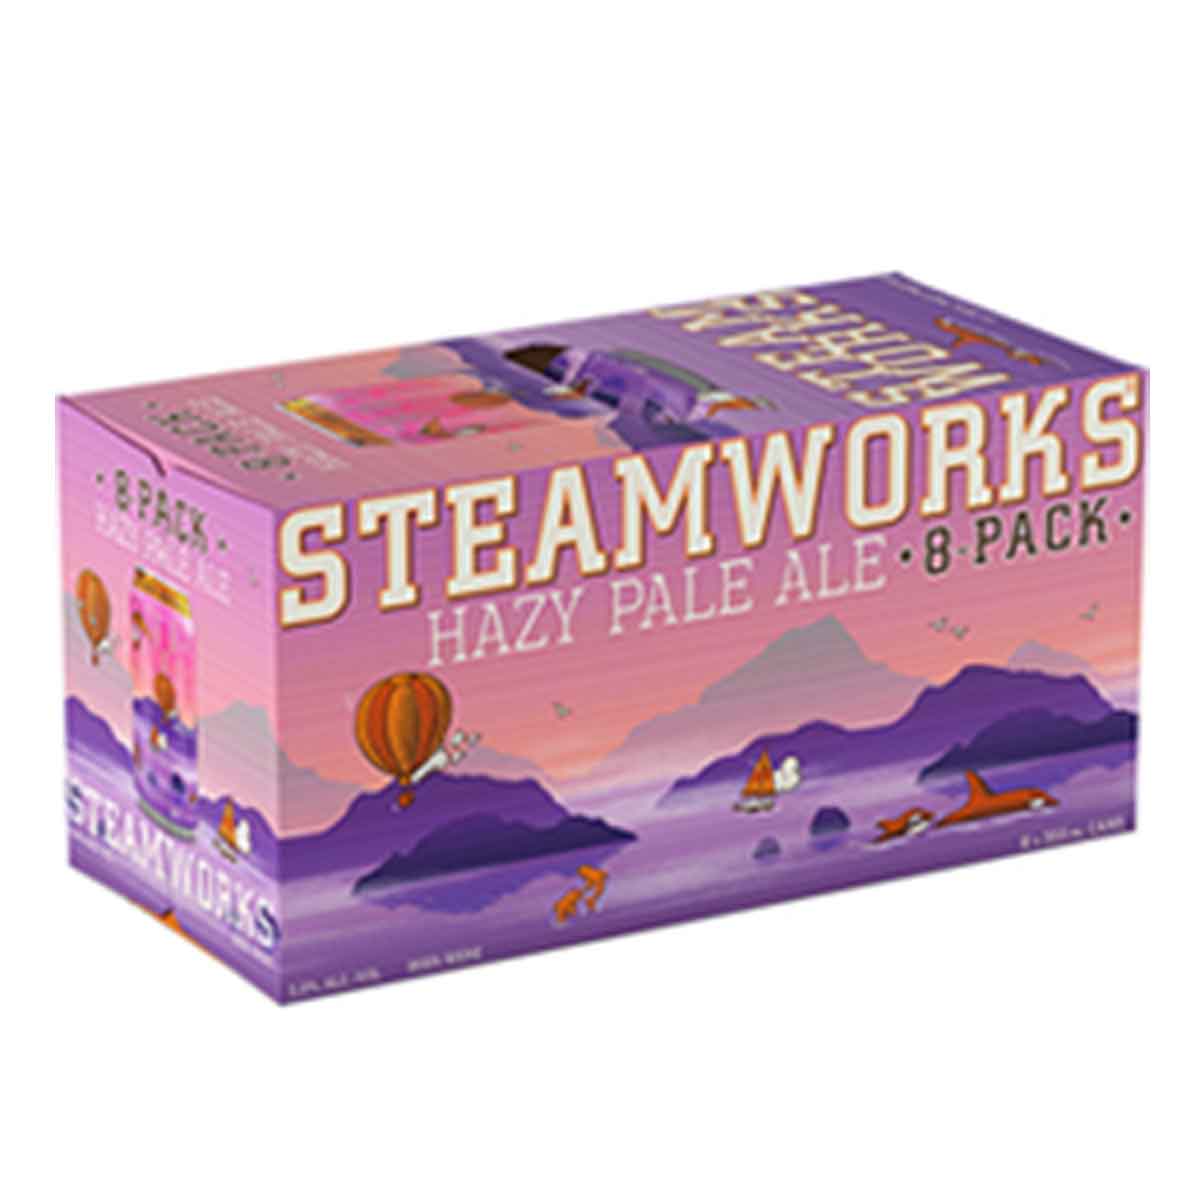 TAG Liquor Stores BC-STEAMWORKS HAZY PALE ALE 8 CAN